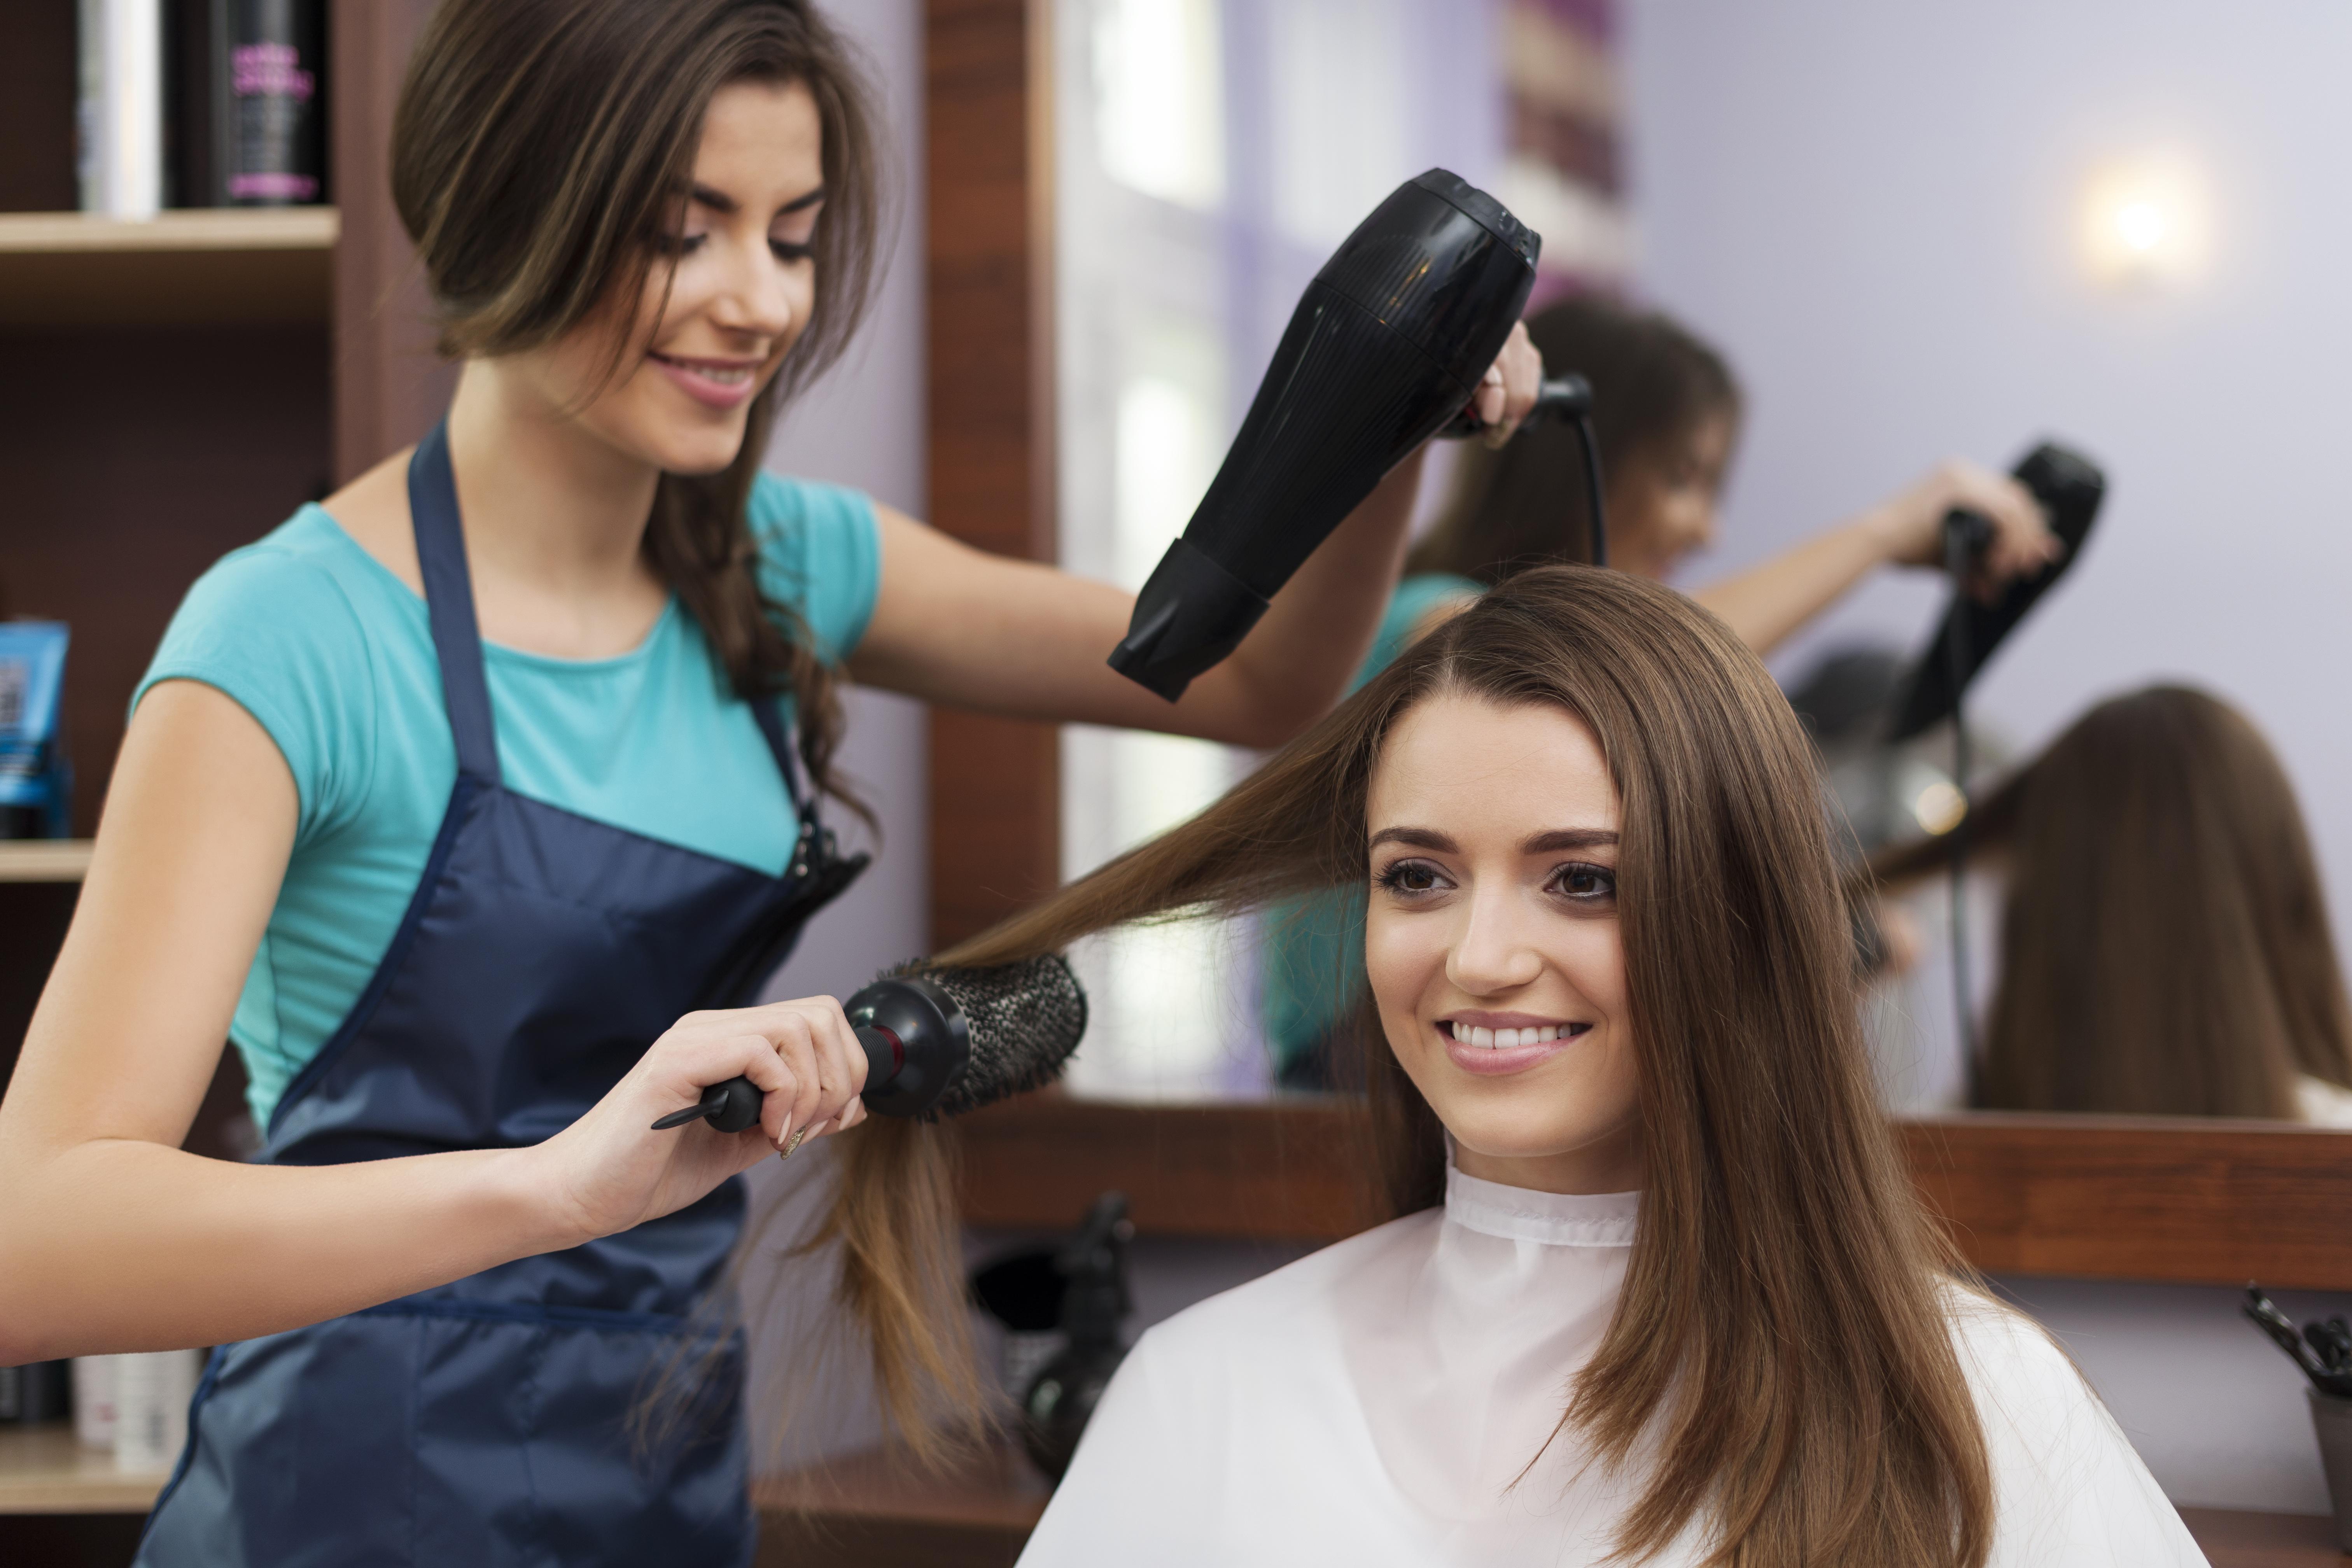 Hairdressing Courses | Certificate III in Hairdressing & Barbering Courses